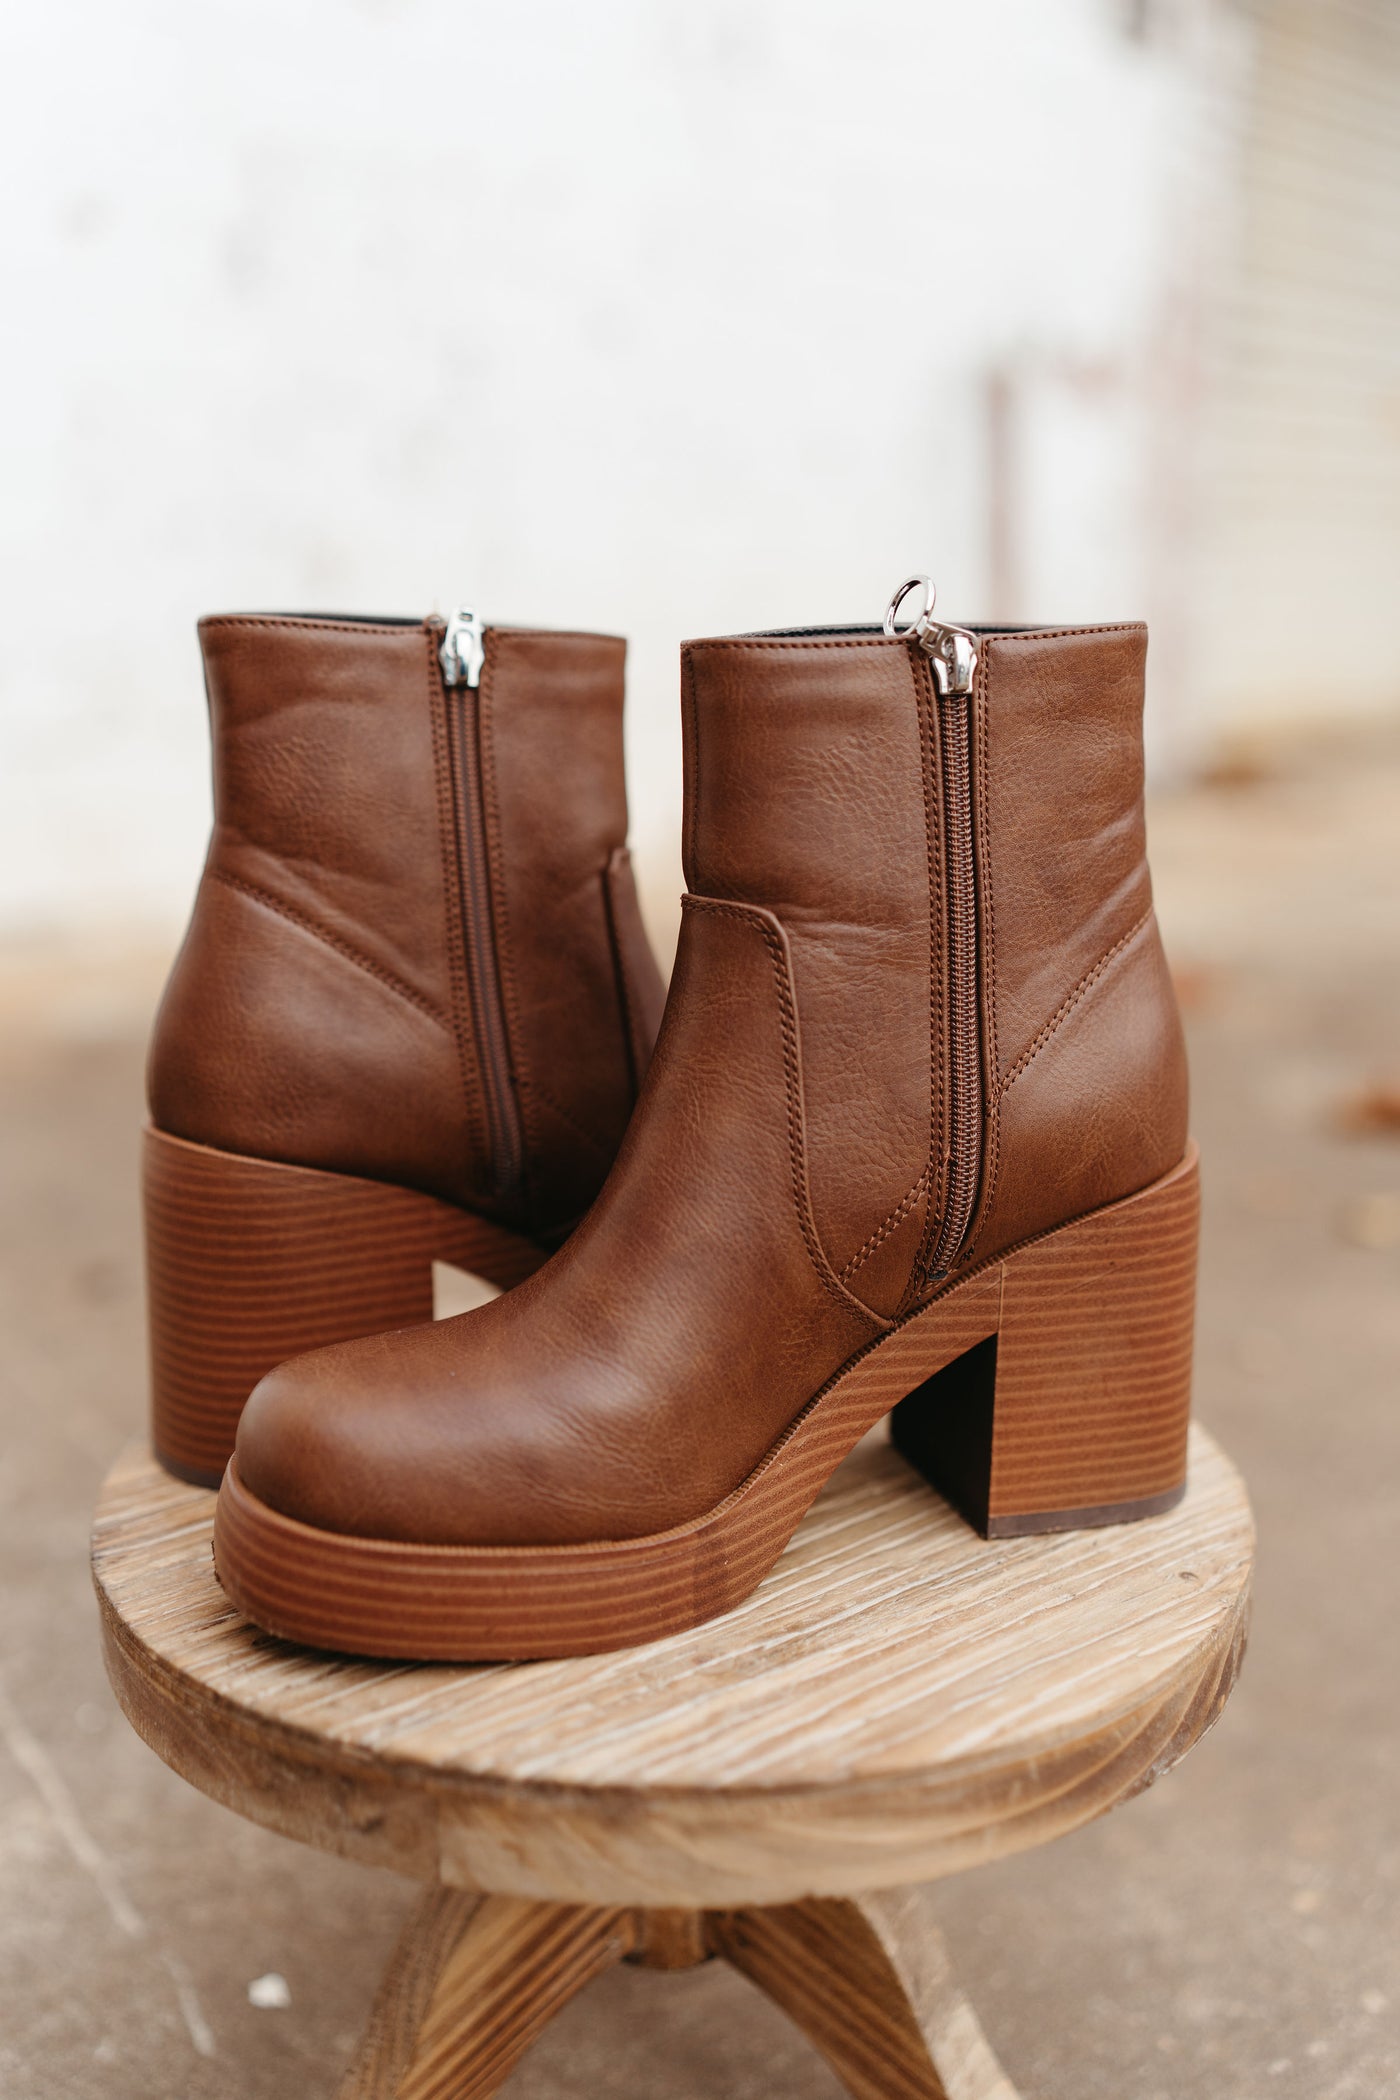 Brown Boot